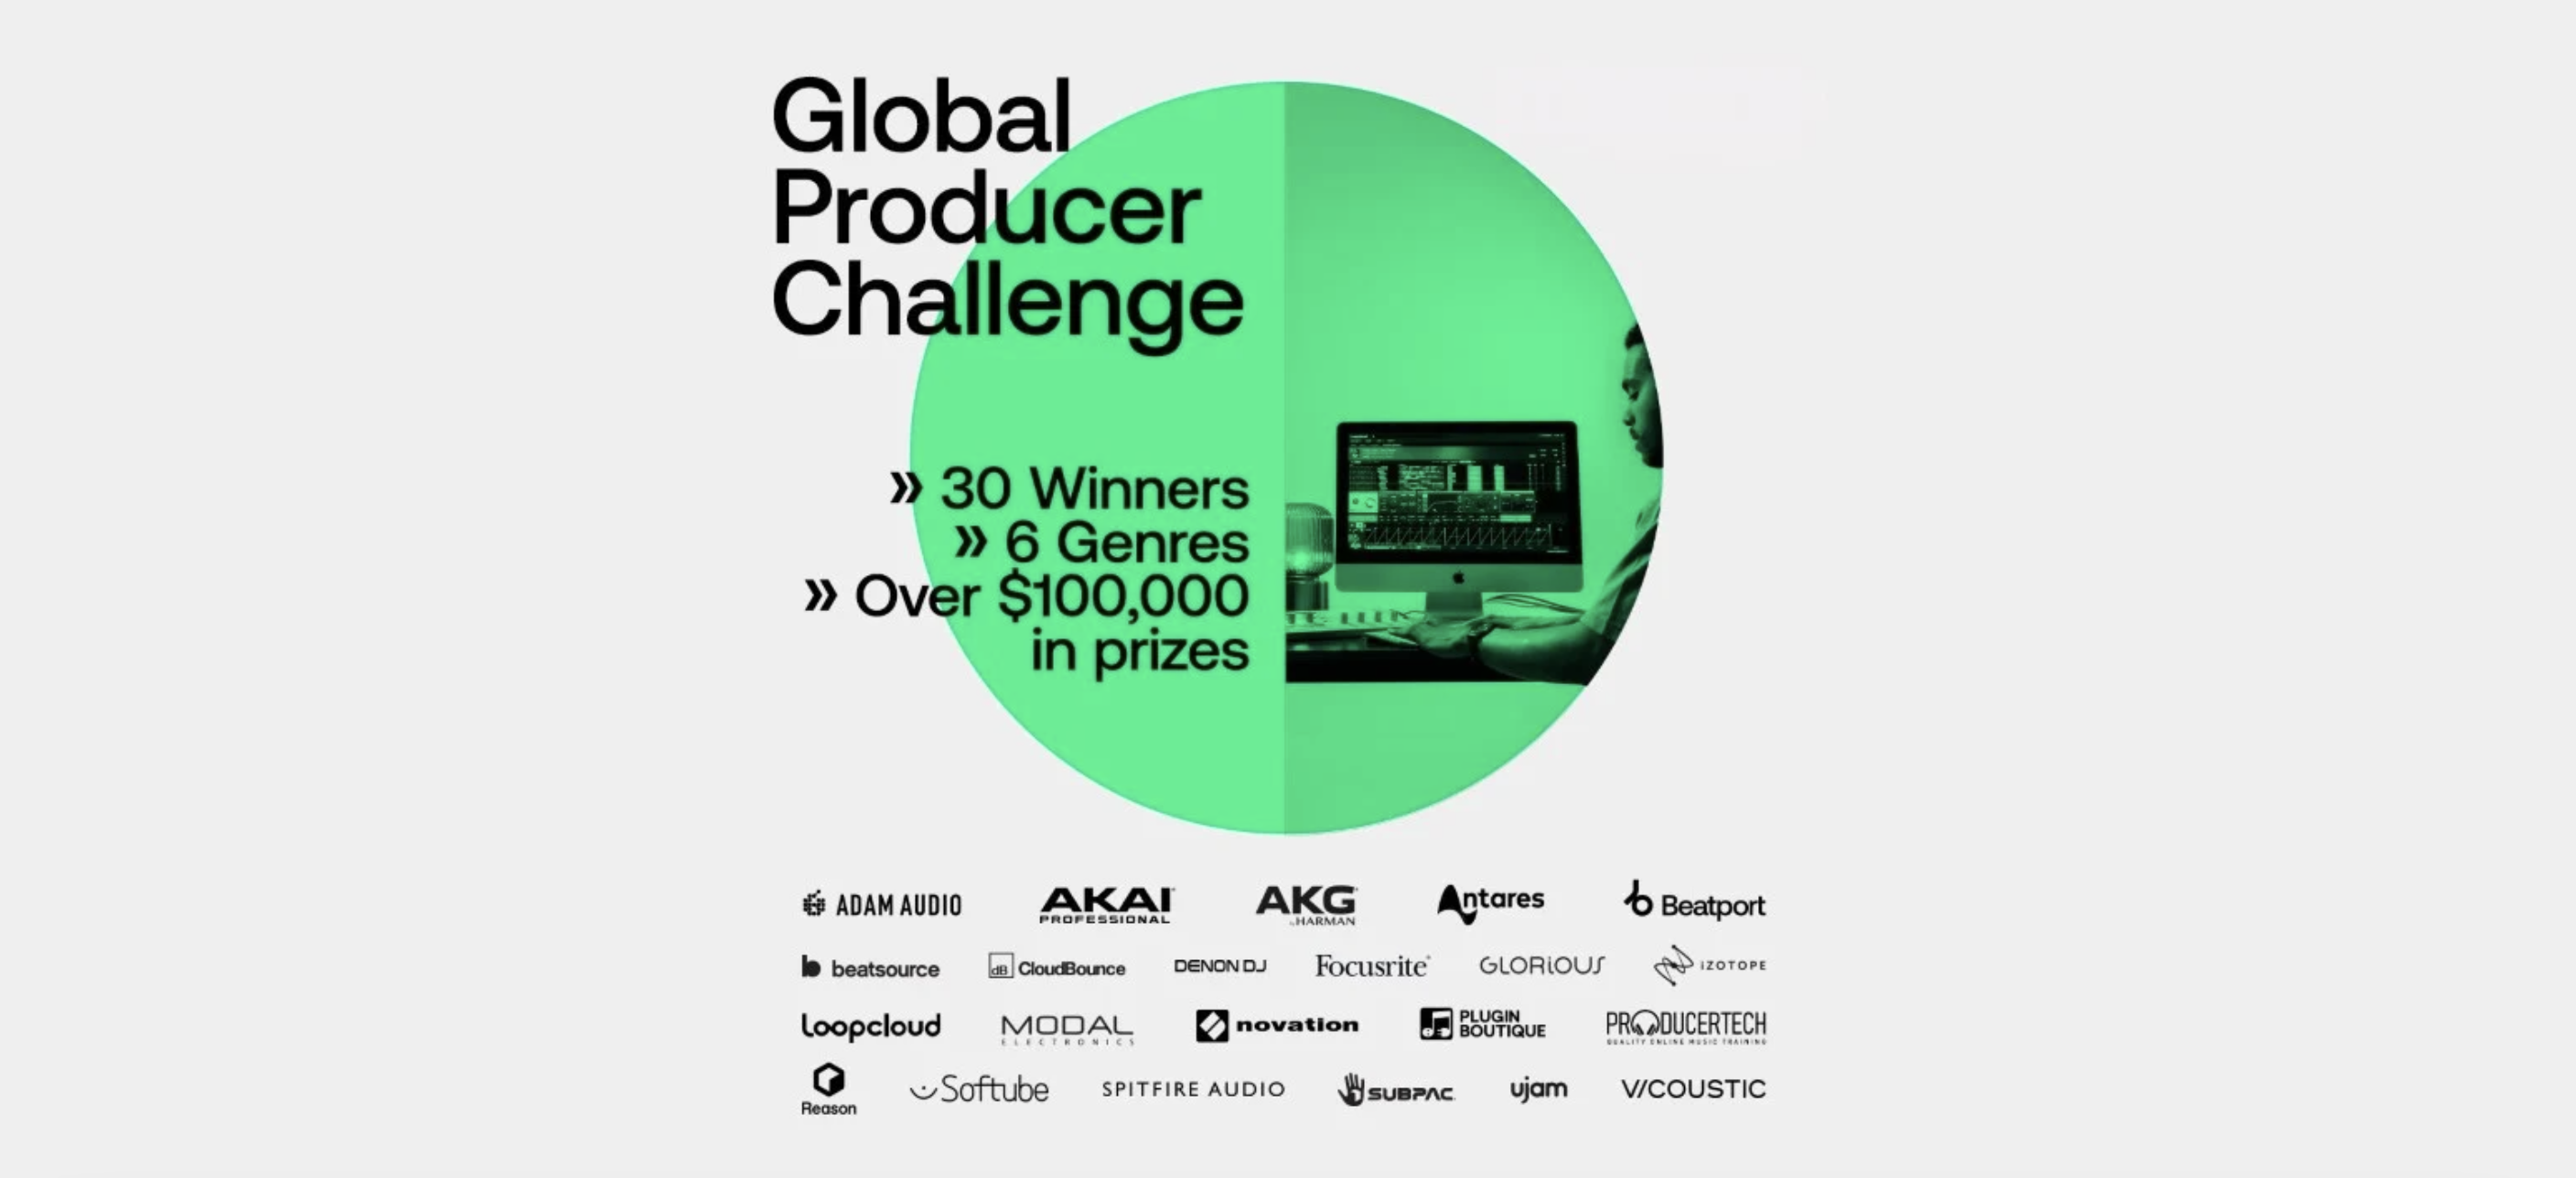 Enter the Global Producer Challenge to win $100,000 in prizes